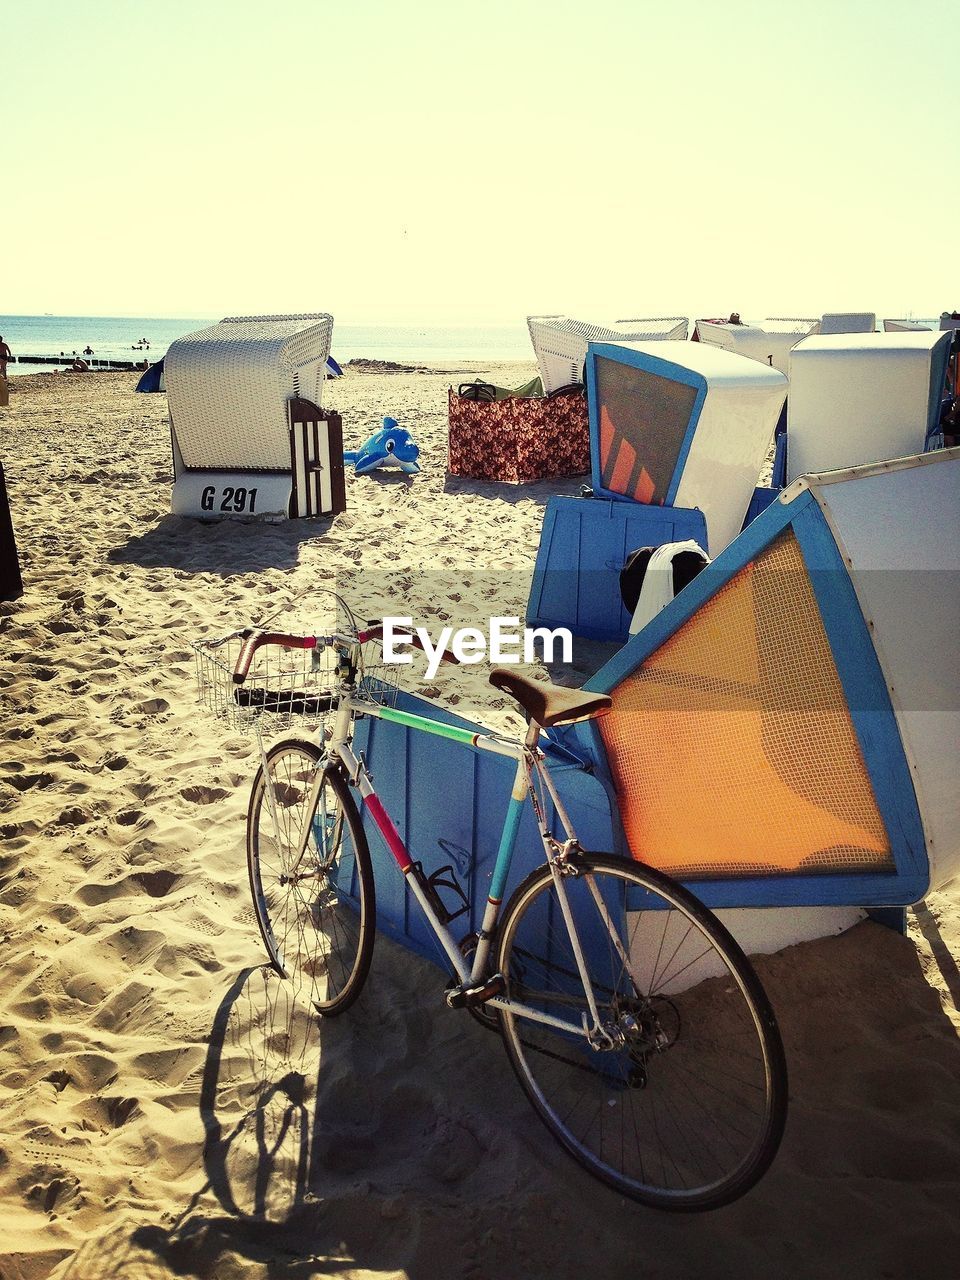 Bicycle and hooded chairs on beach